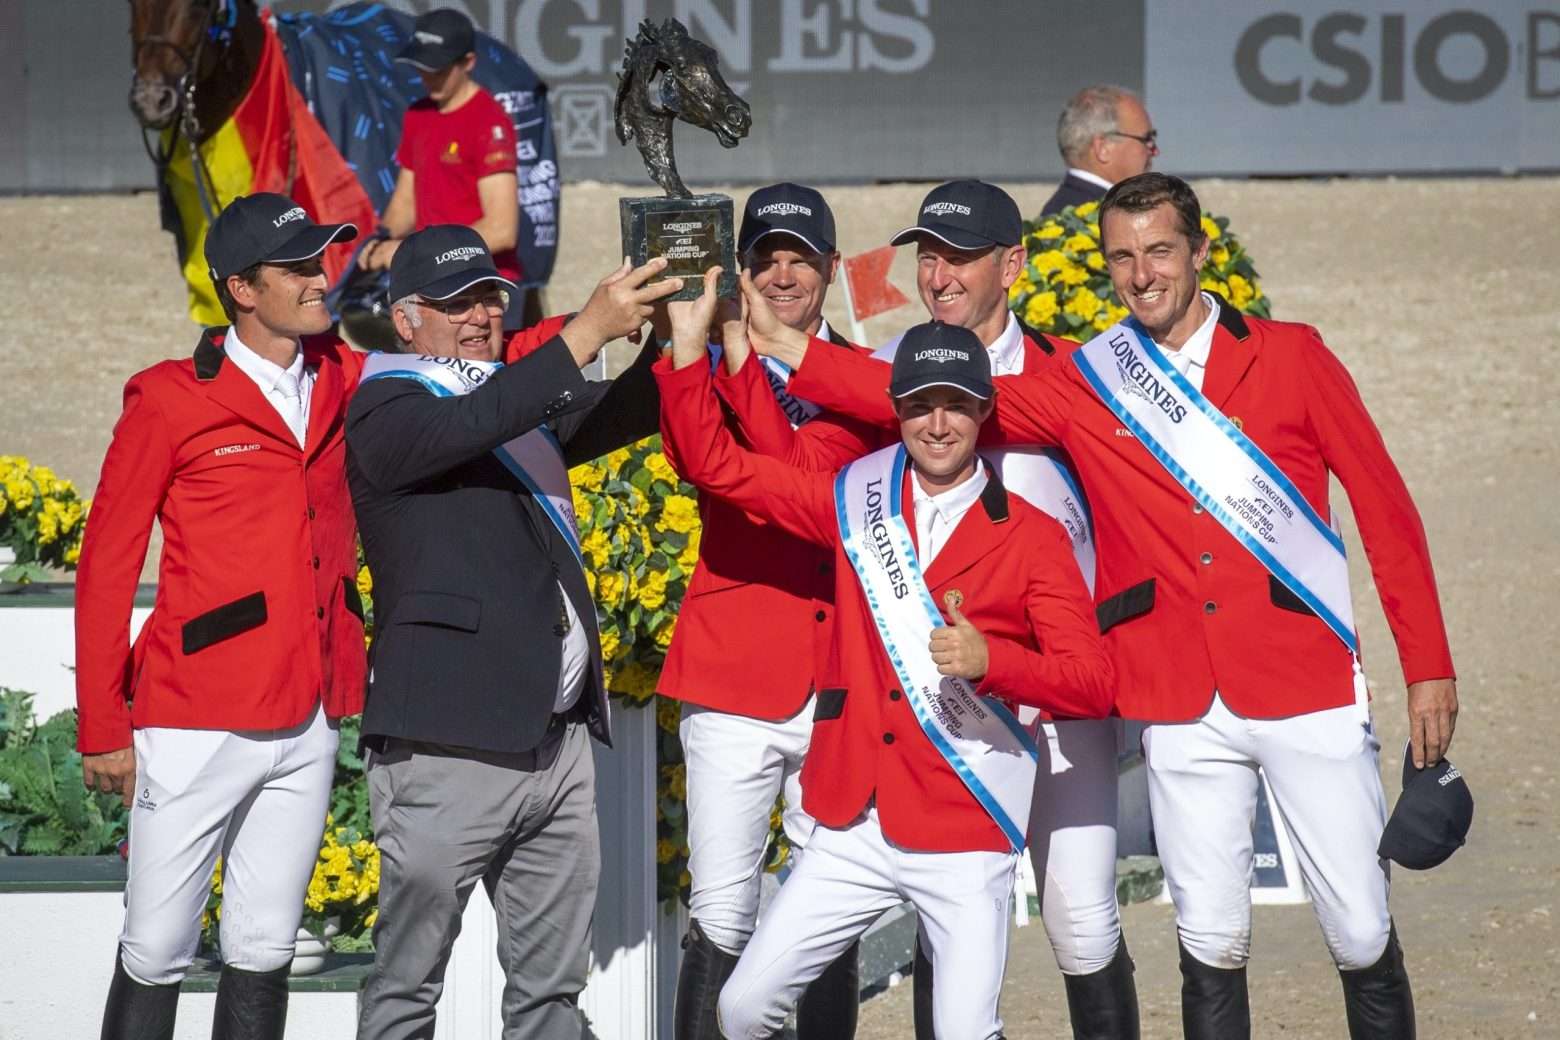 Team Belgium won the Longines FEI Jumping Nations Cup™ 2022 Final at Real Club de Polo in Barcelona, Spain today. (L to R) Olivier Philippaerts, Peter Weinberg (Chef d’Equipe), Jérôme Guery, Koen Vereecke, Gregory Wathelet and Gilles Thomas. (FEI/Richard Juilliart)